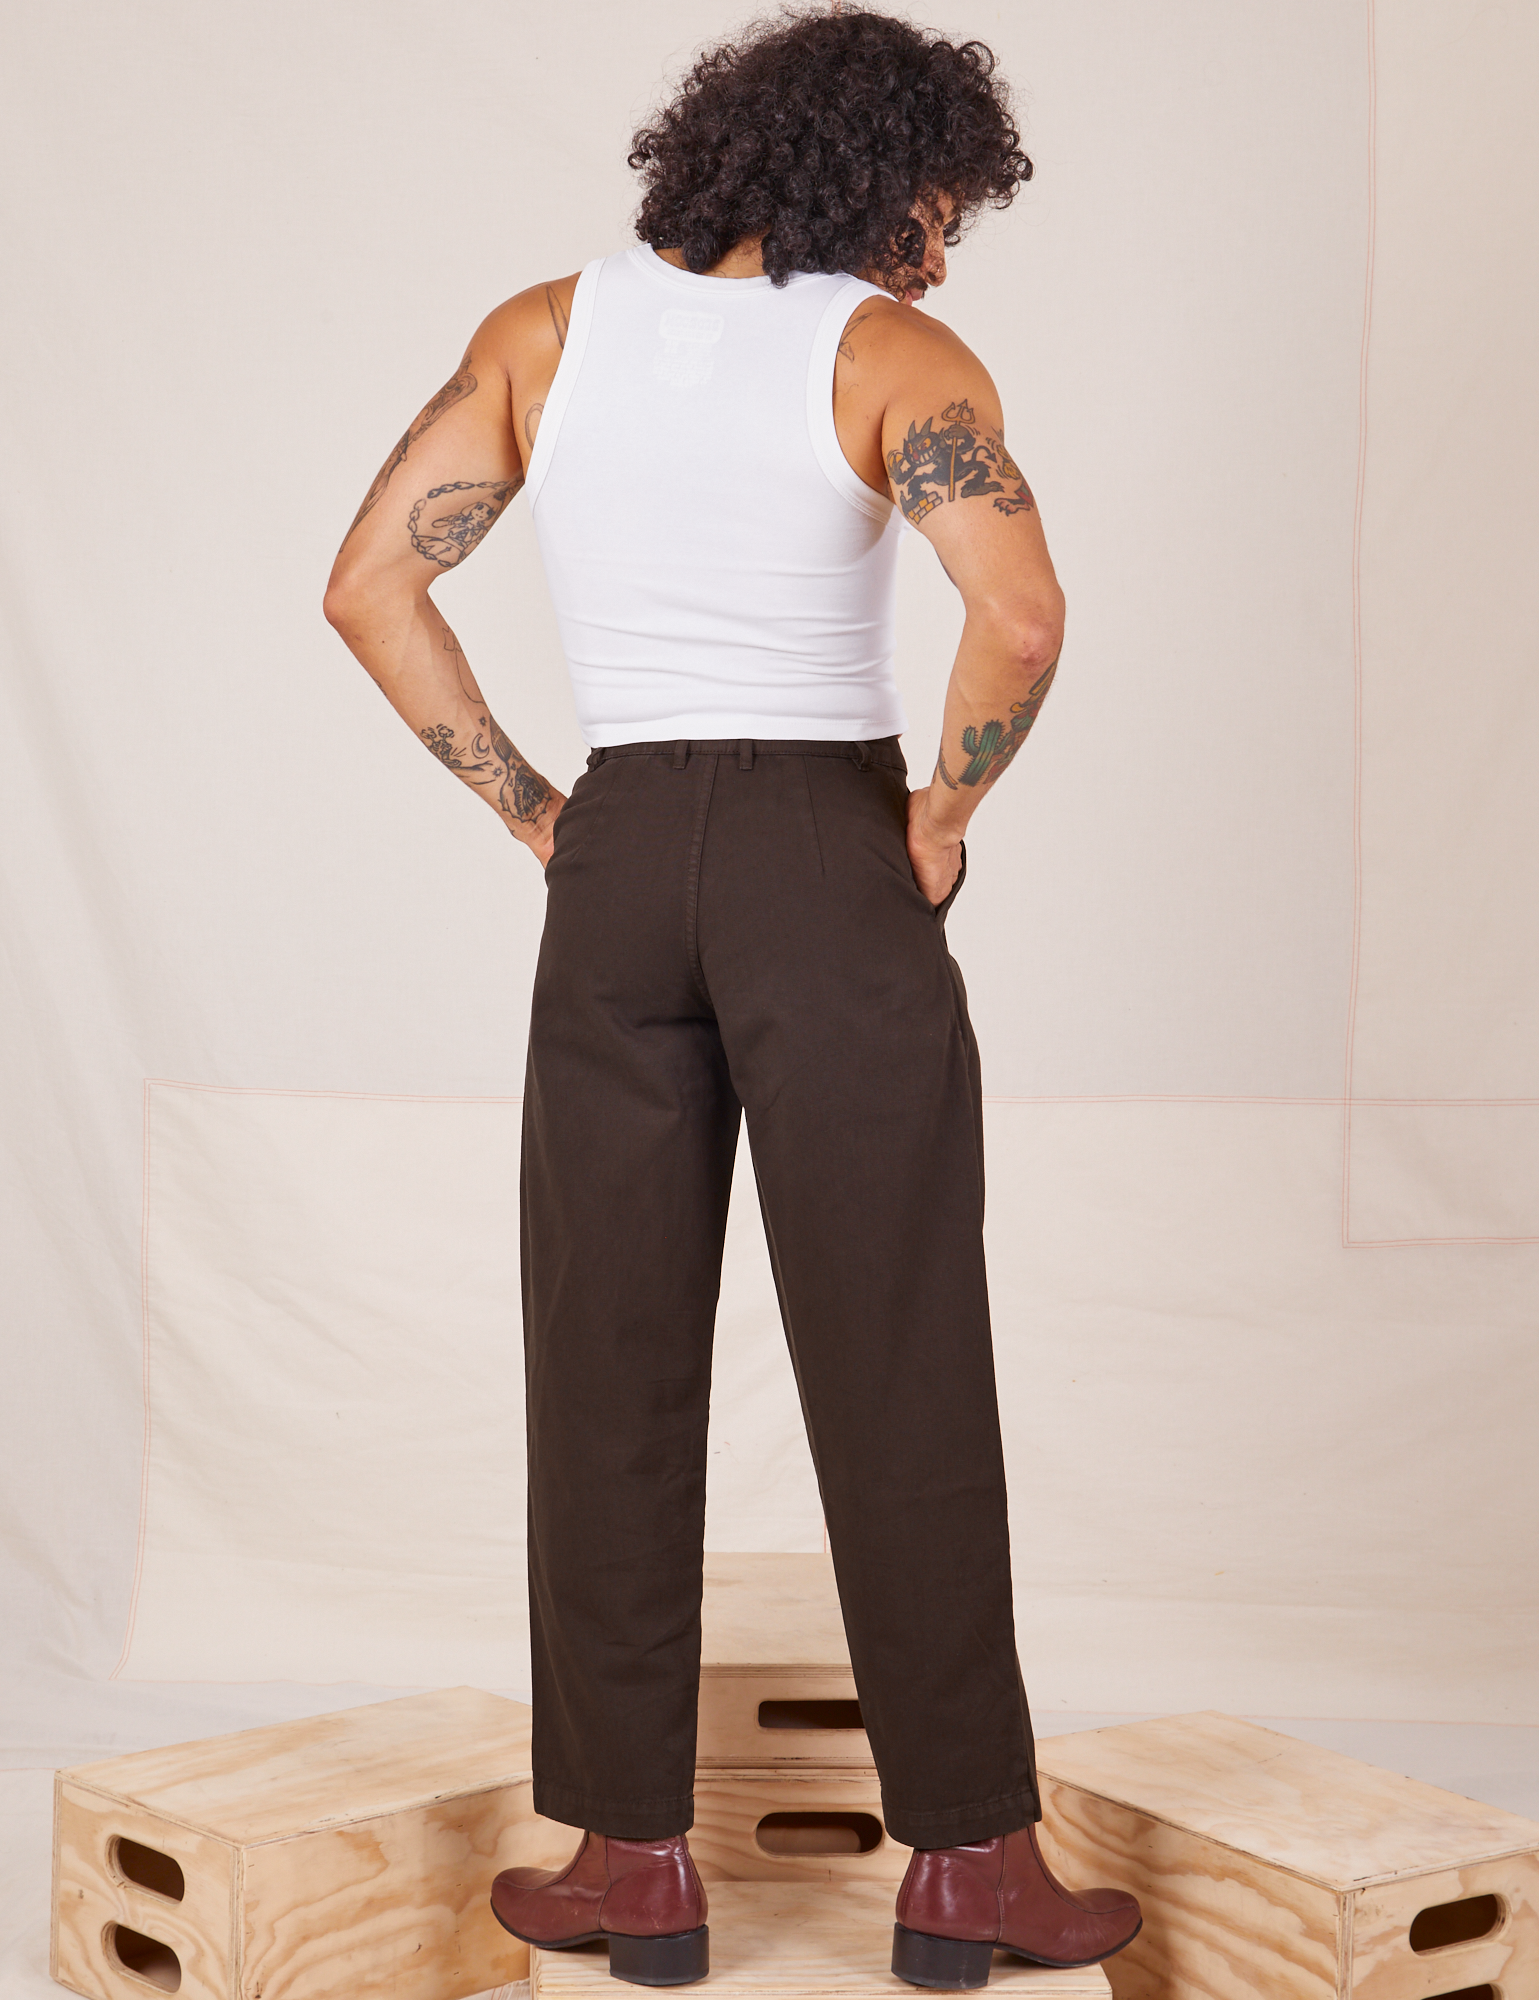 Back view of Heavyweight Trousers in Espresso Brown and Cropped Tank Top in vintage tee off-white